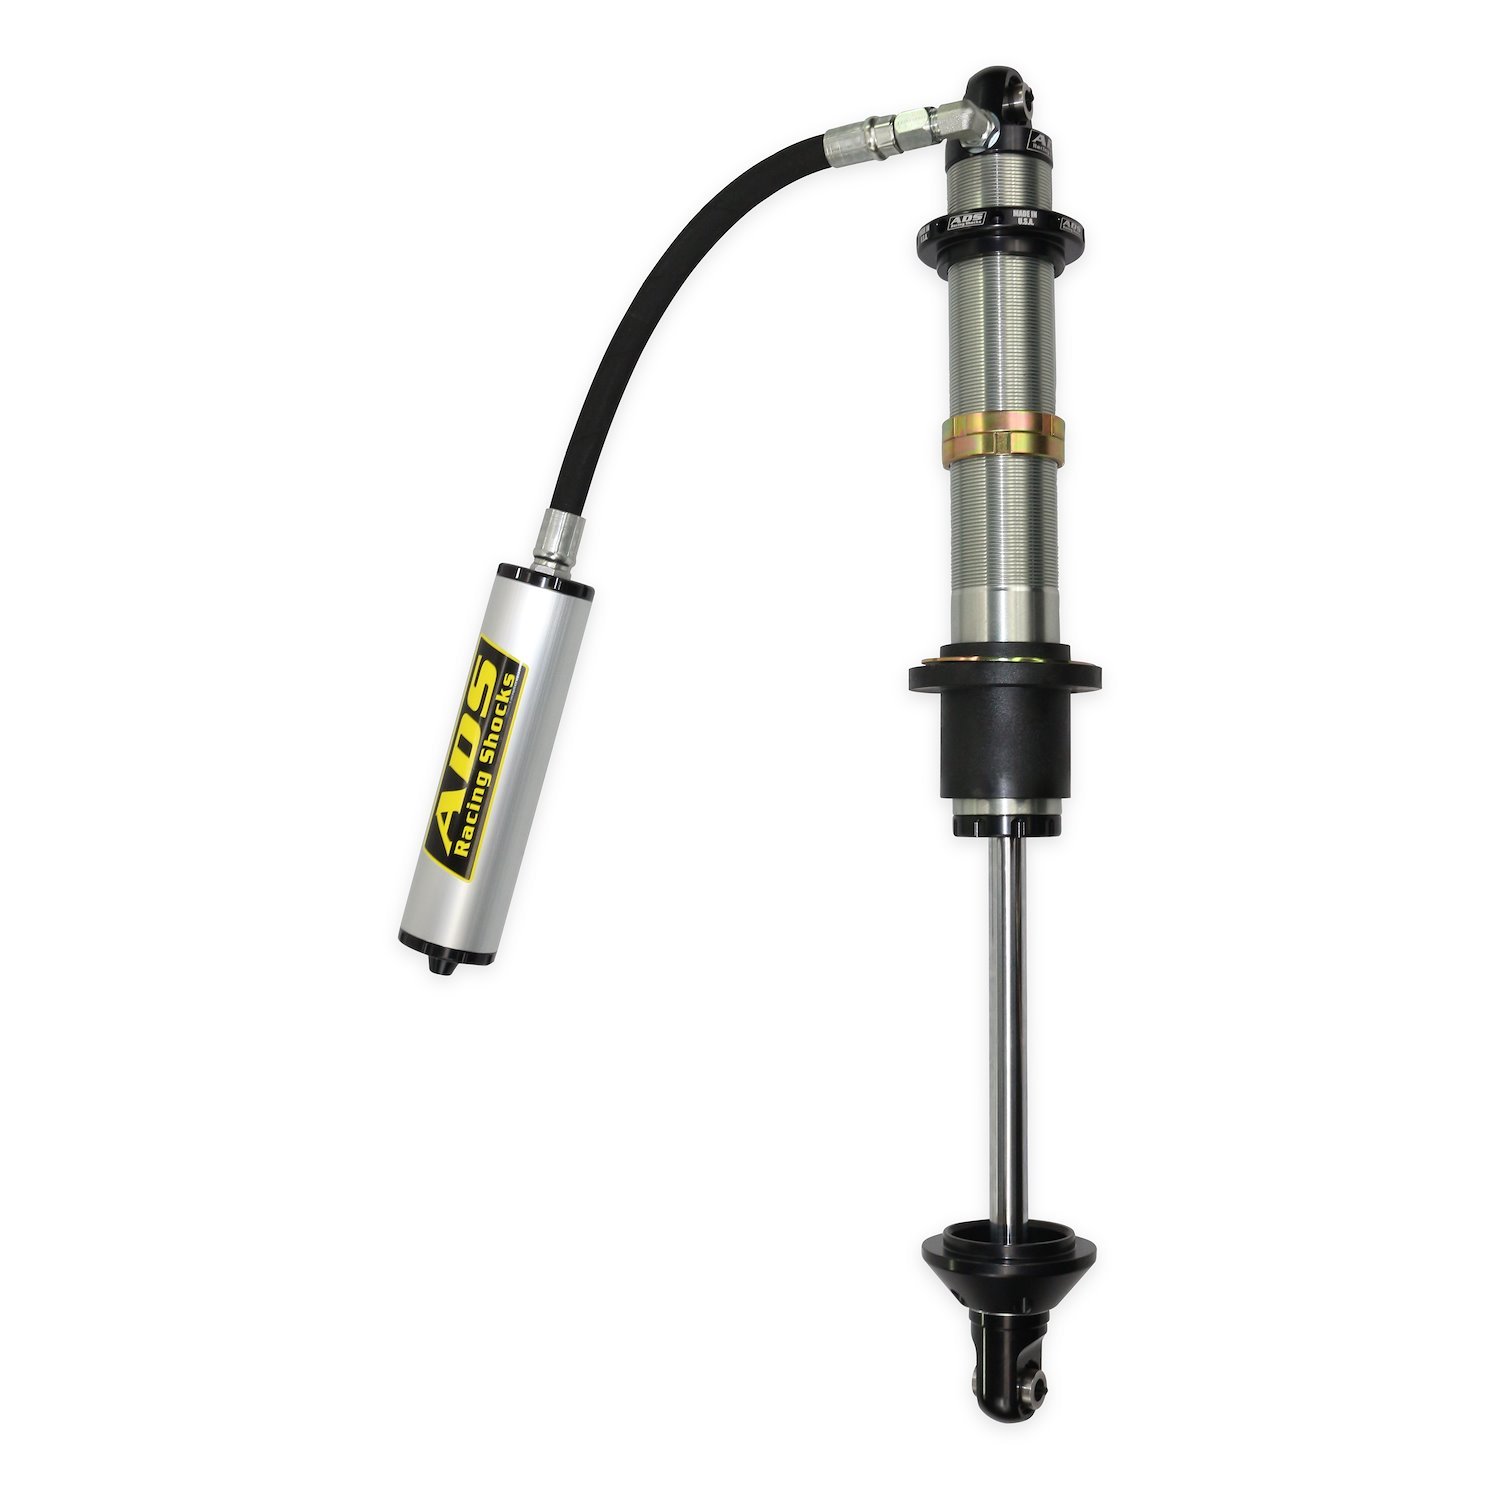 250-COR10-900 Coil-Over Race Shock, 2.5 in. x 10 in. Stroke, w/ Remote Reservoir (90-Degree Hose)